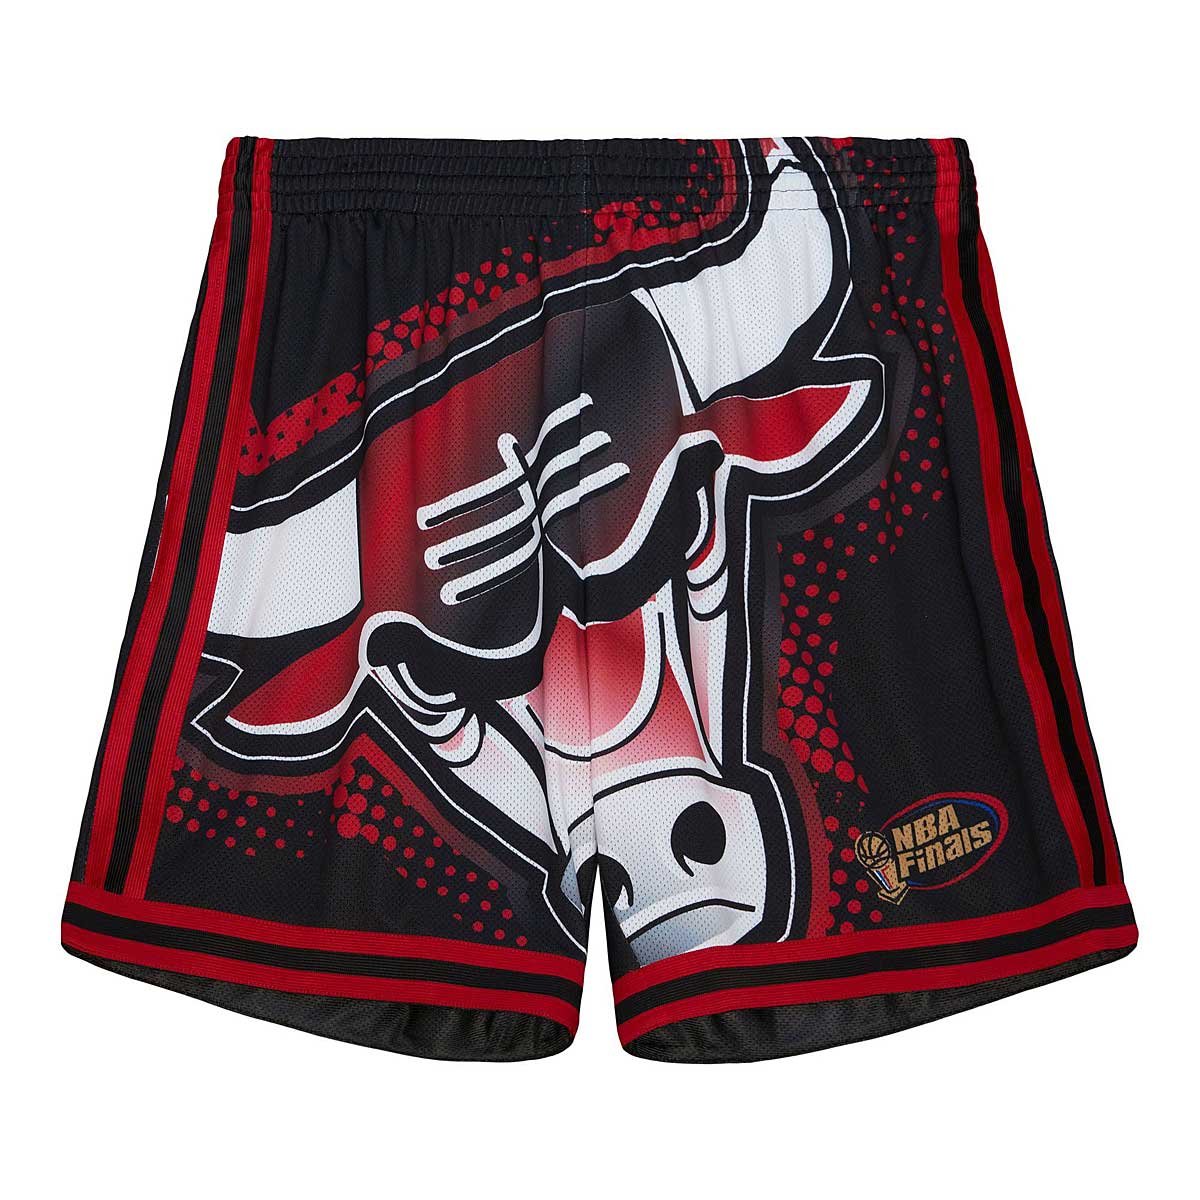 Image of Mitchell And Ness NBA Chicago Bulls Big Face 7.0 Shorts, Black